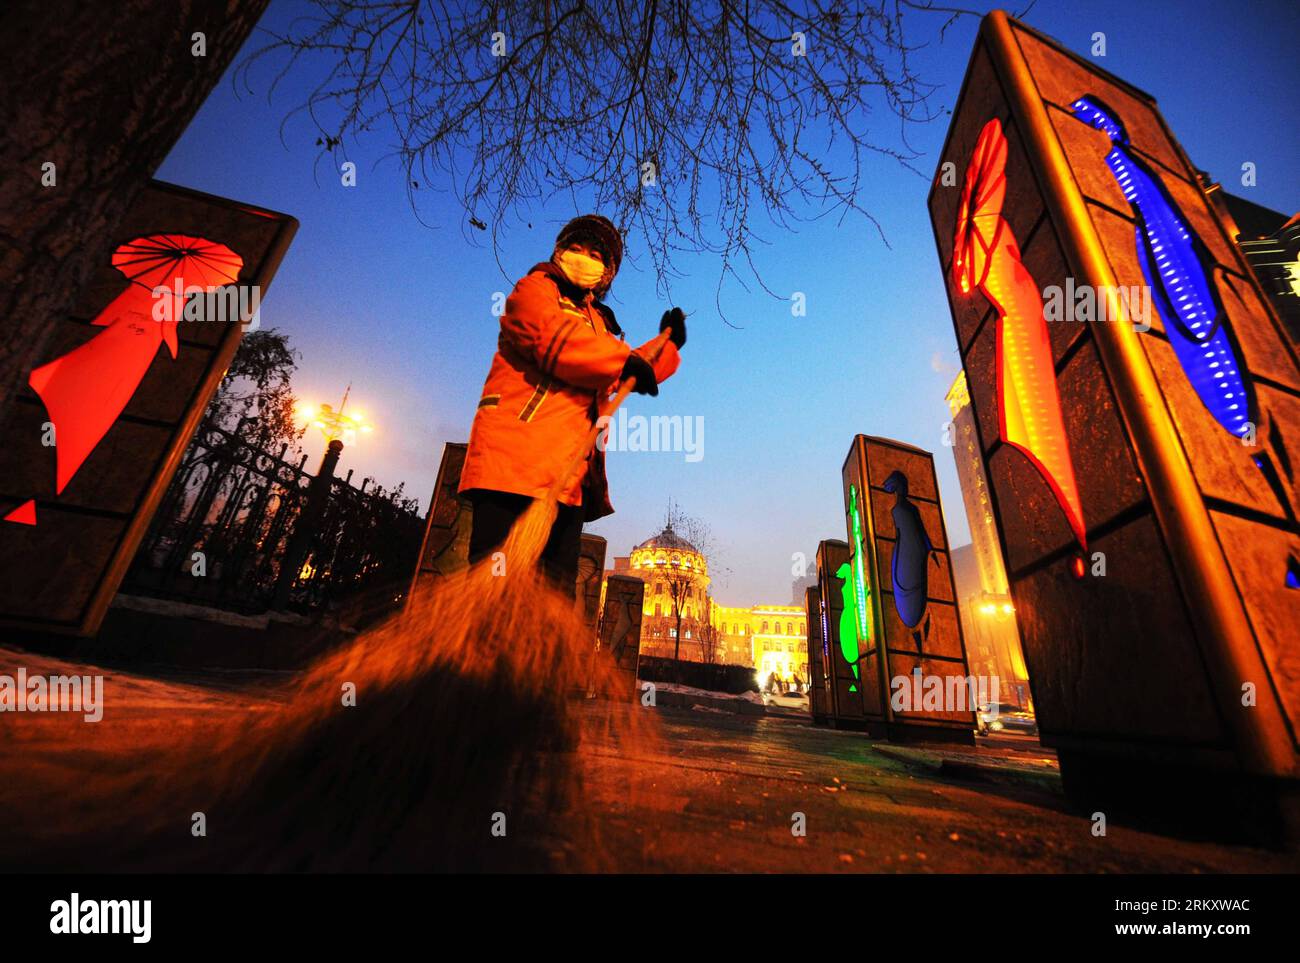 Bildnummer: 59095358  Datum: 16.01.2013  Copyright: imago/Xinhua HARBIN, Jan. 16, 2013 (Xinhua) -- Sanitation worker Yang Weixia sweeps a road in Harbin, capital of northeast China s Heilongjiang Province, Jan. 16, 2013. Yang Weixia, 48, is an ordinary sanitation worker living in Harbin, a city known for its bitterly cold winters and often called the Ice City. For 32 years, Yang has never stopped sweating away at her work, though she often gets up at three o clock every morning and will not go back home until 9 in the evening in the cold winter. There are more than 10,000 sanitation workers li Stock Photo